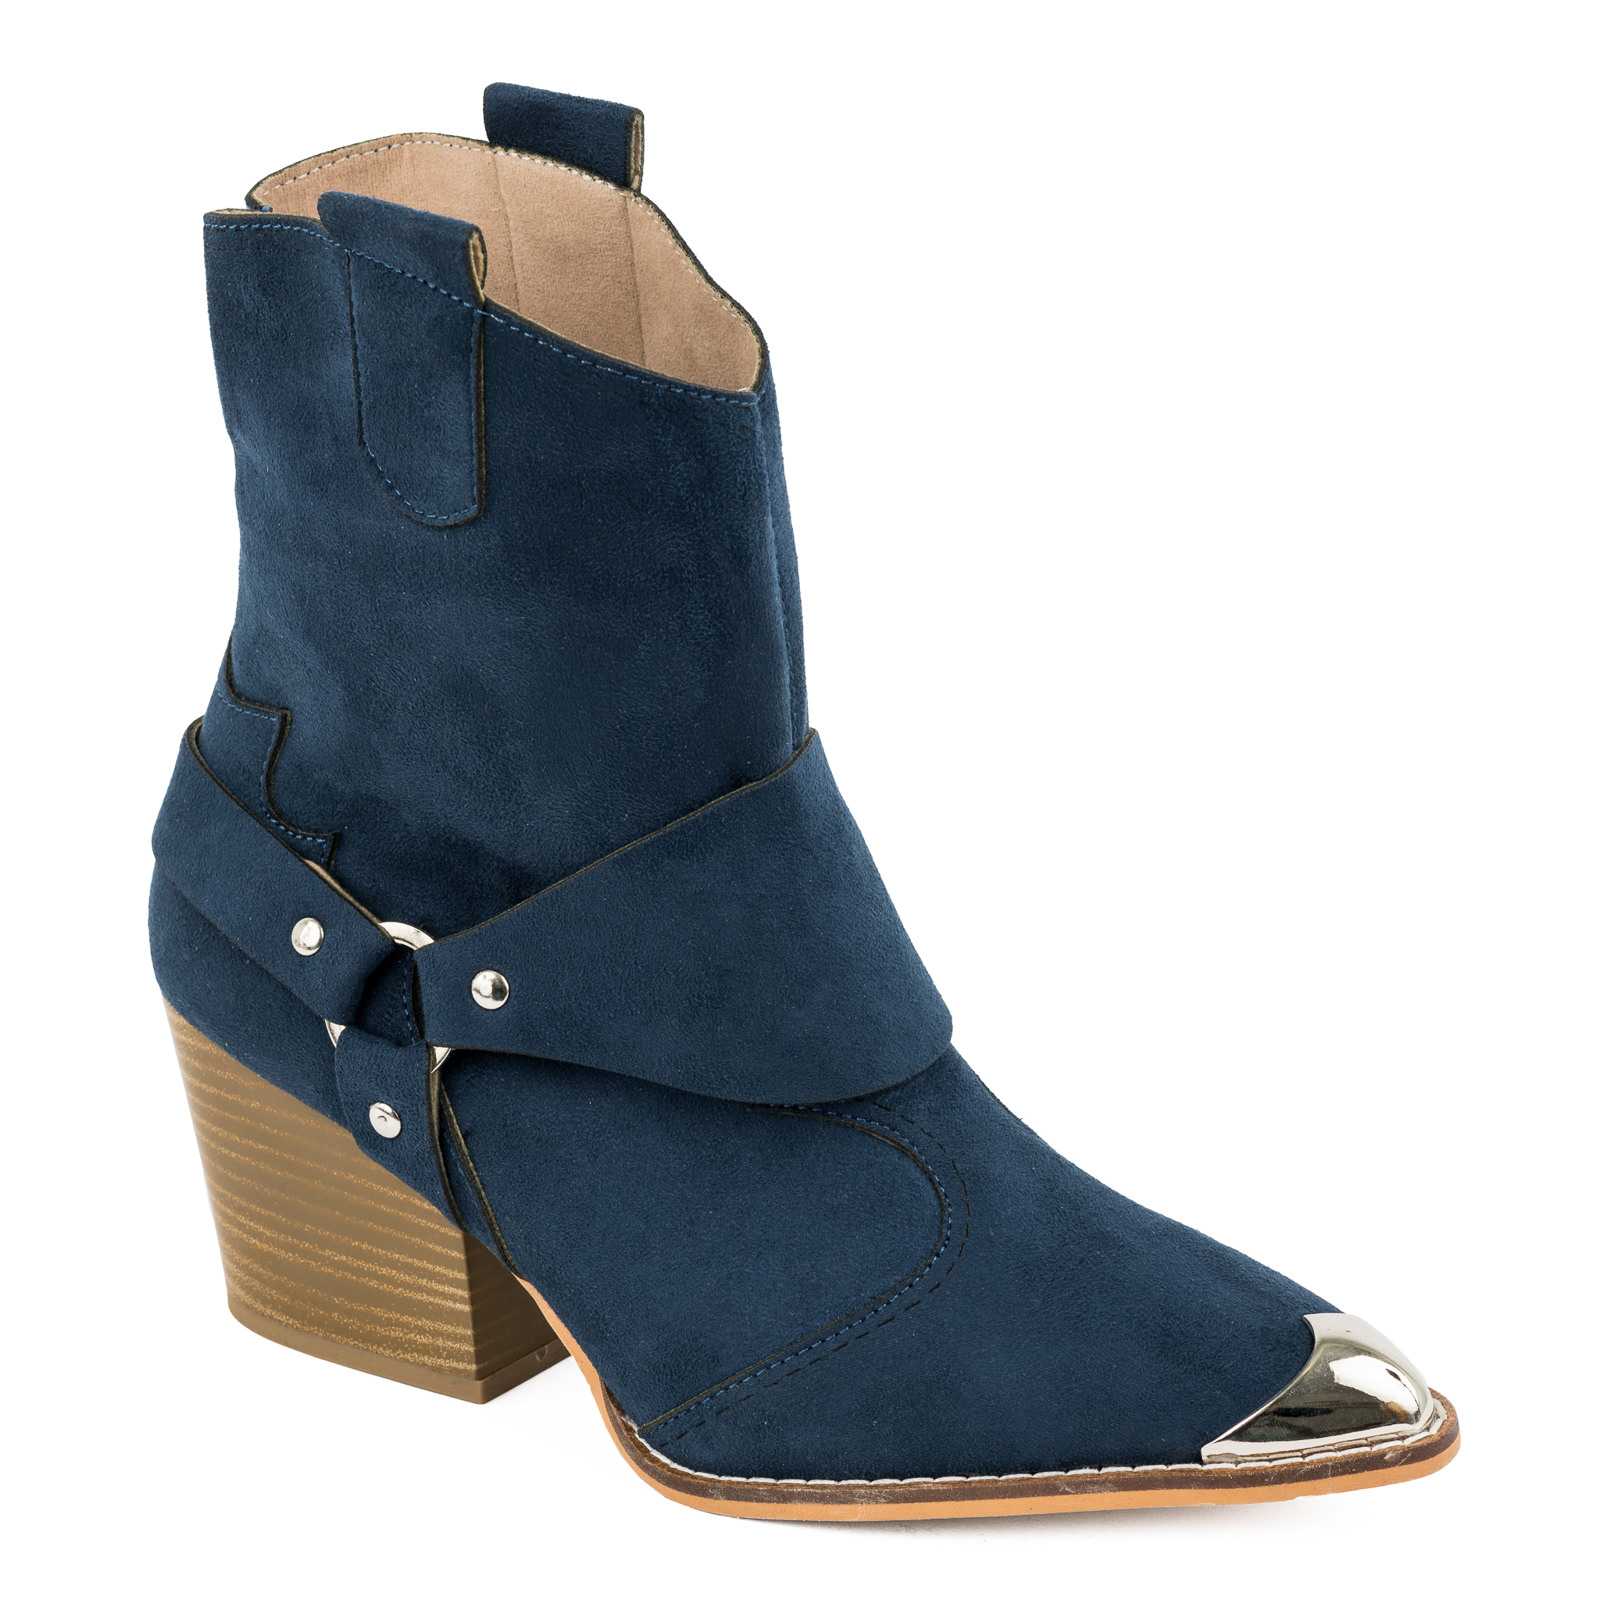 VELOUR POINTED COWGIRL BOOTS WITH THICK HEEL AND RIVETS - NAVY BLUE